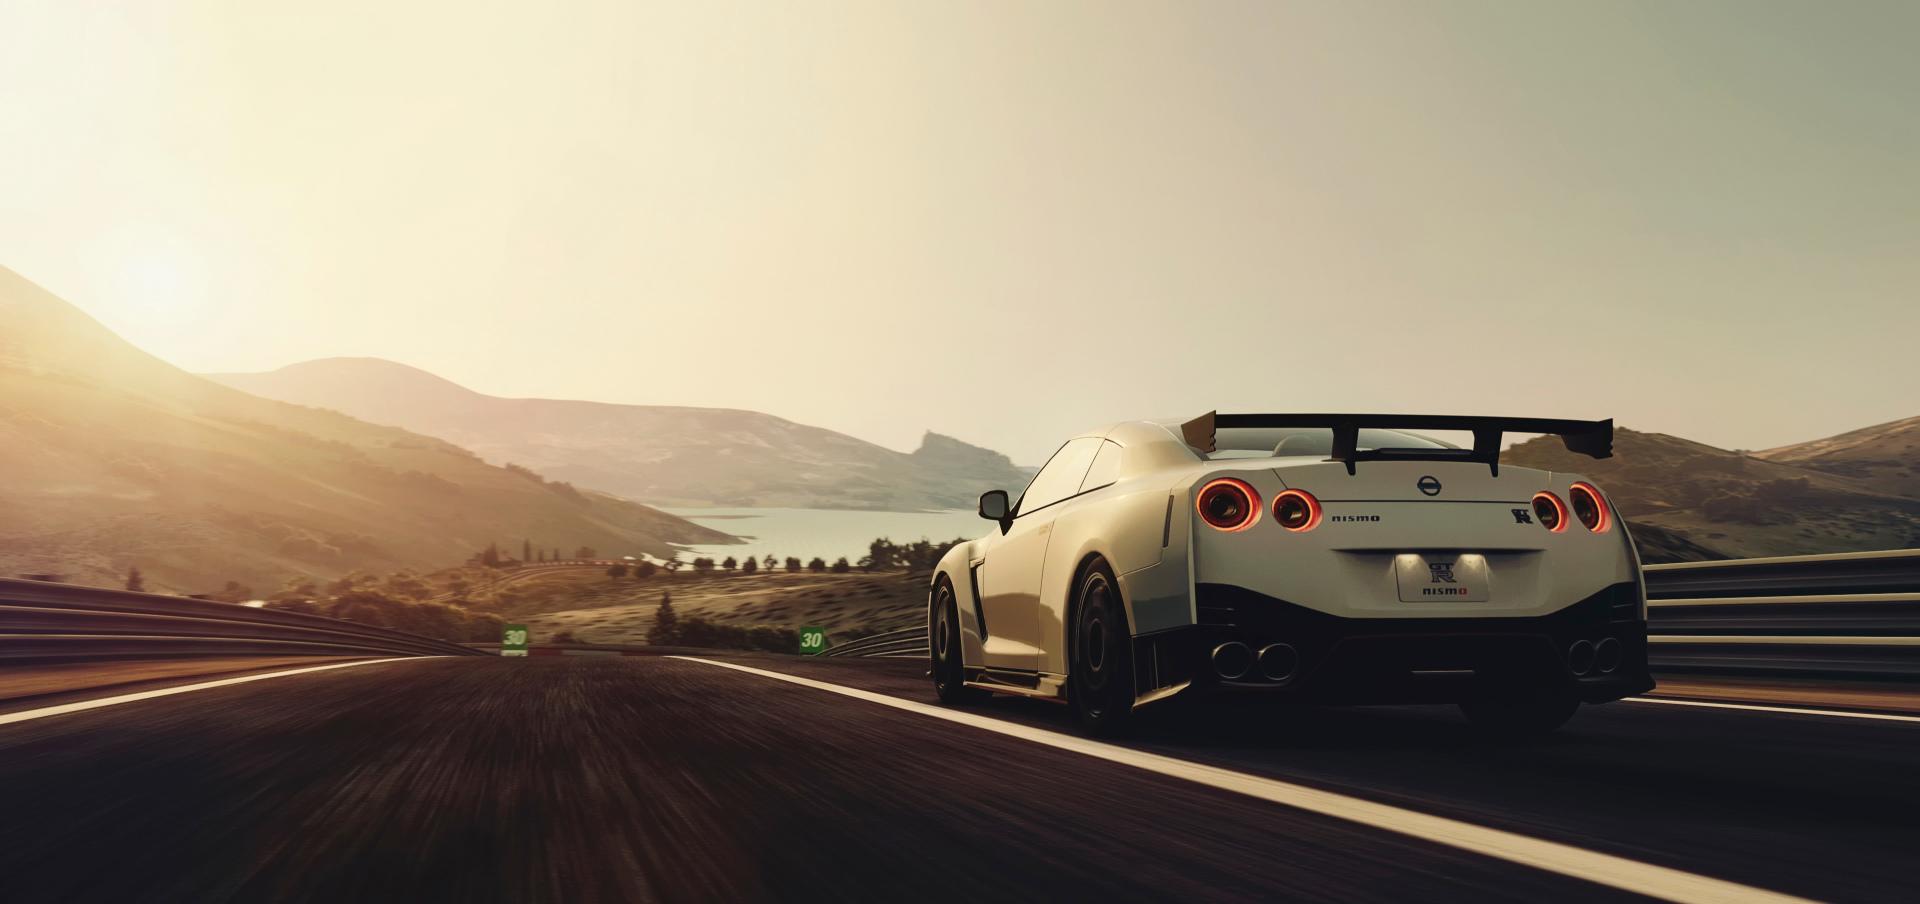 Nissan GT-R Nismo wallpapers HD quality